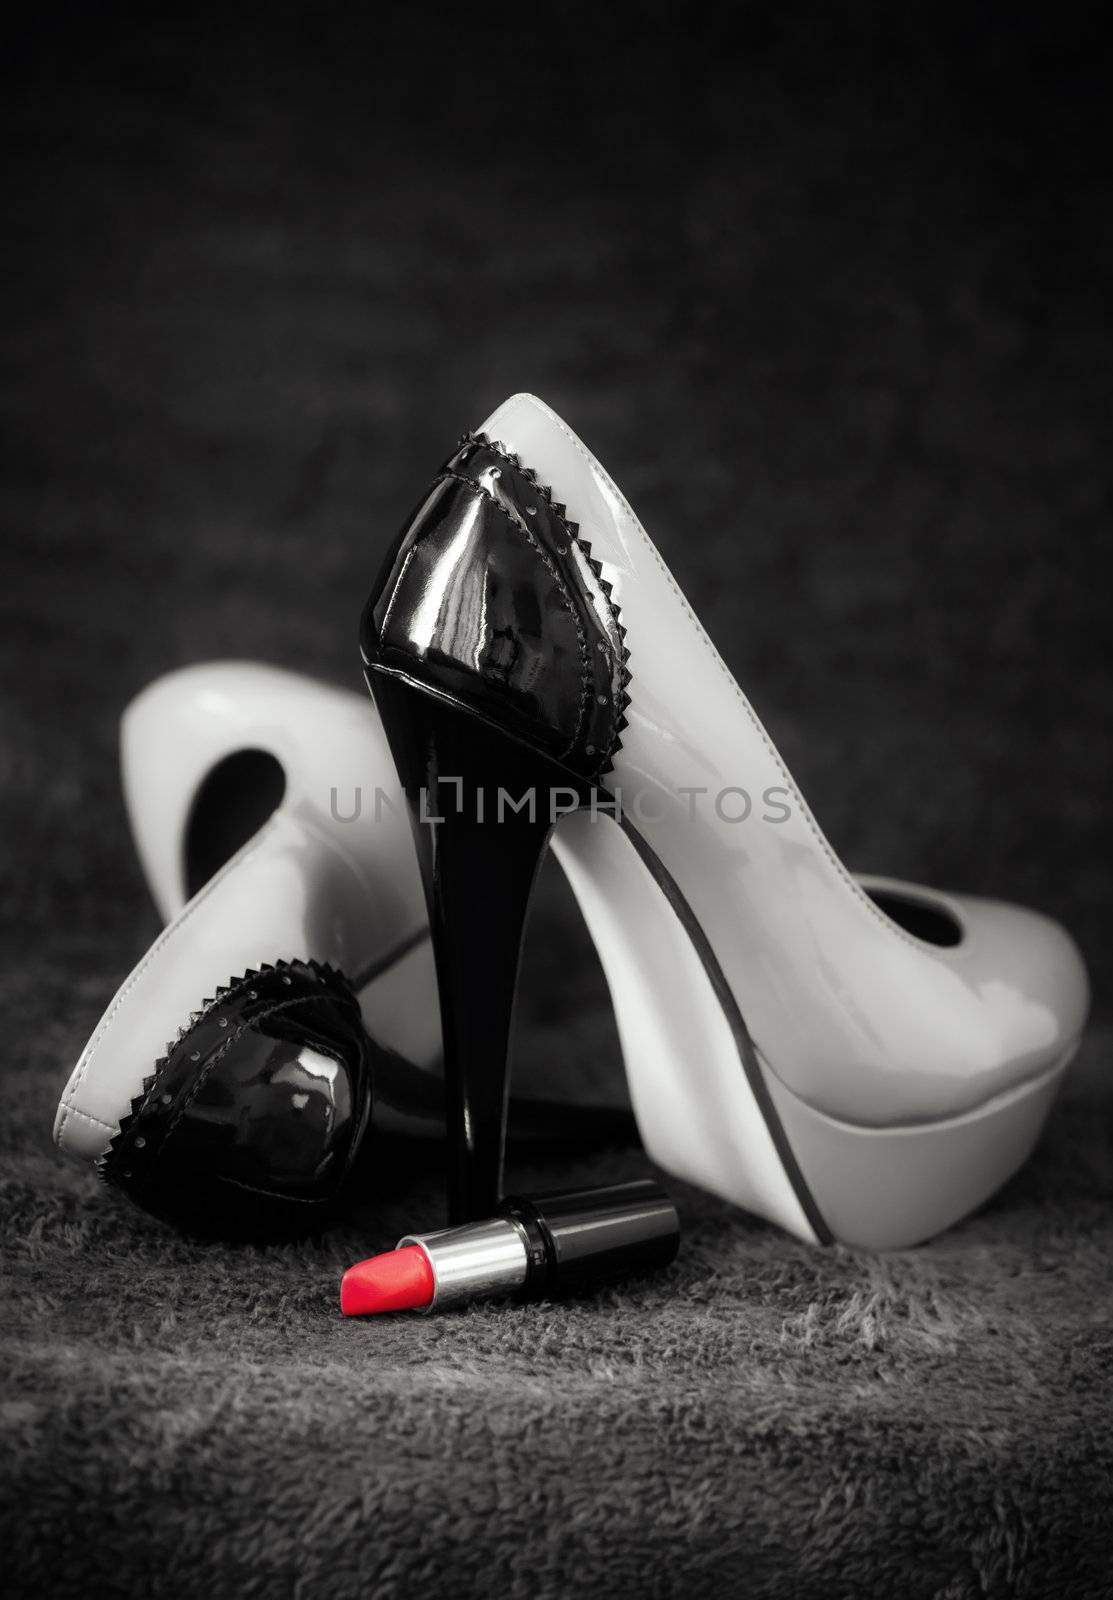 Concept about women sexuality with tall shoes and red lipstick